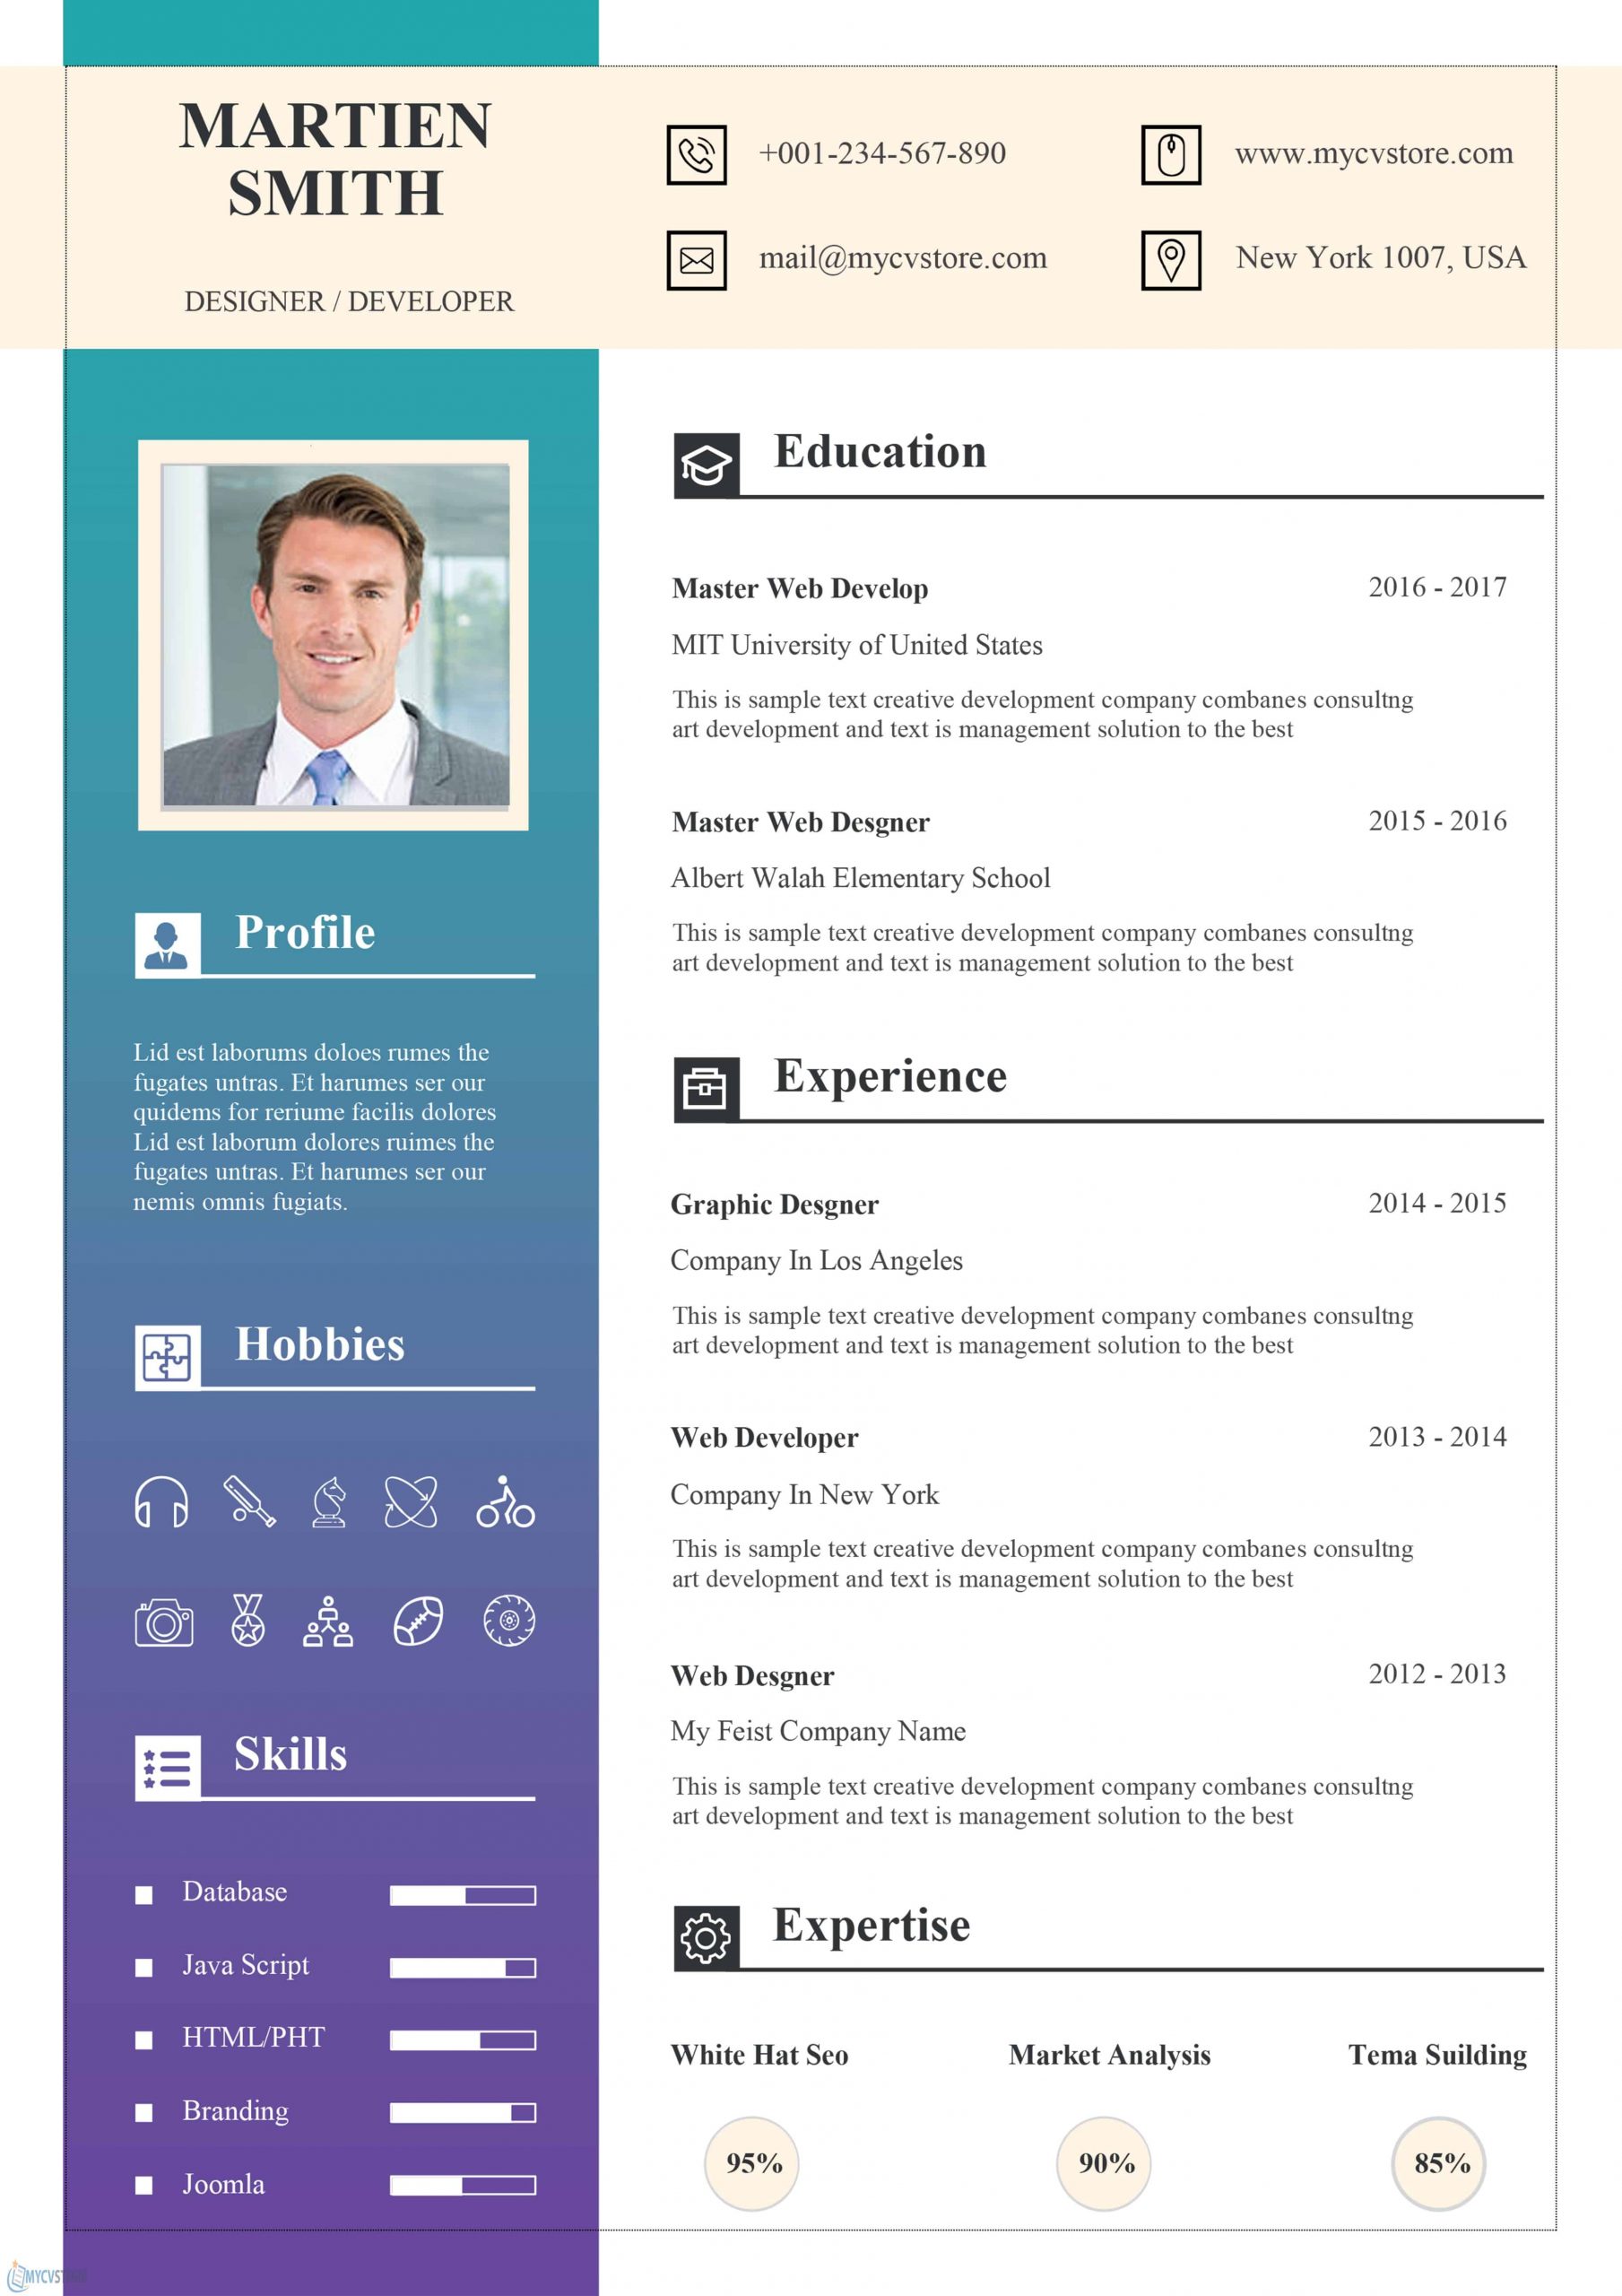 Exemple De Cv Word A Telecharger Curriculum Vitae Template Images